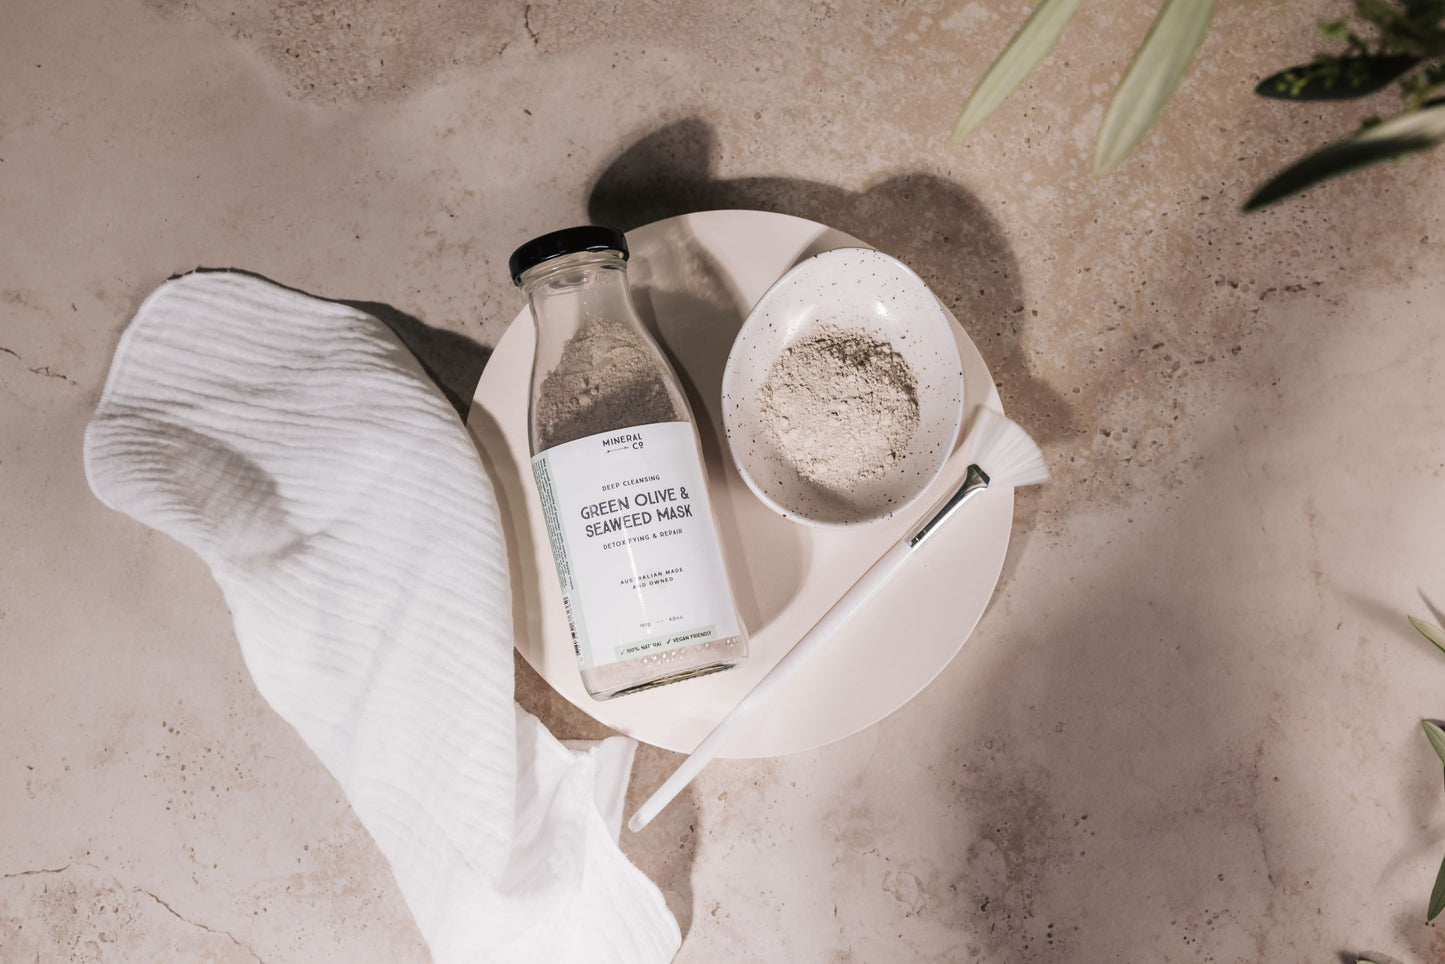 Bottle of Powdered Green olive and seaweed mask